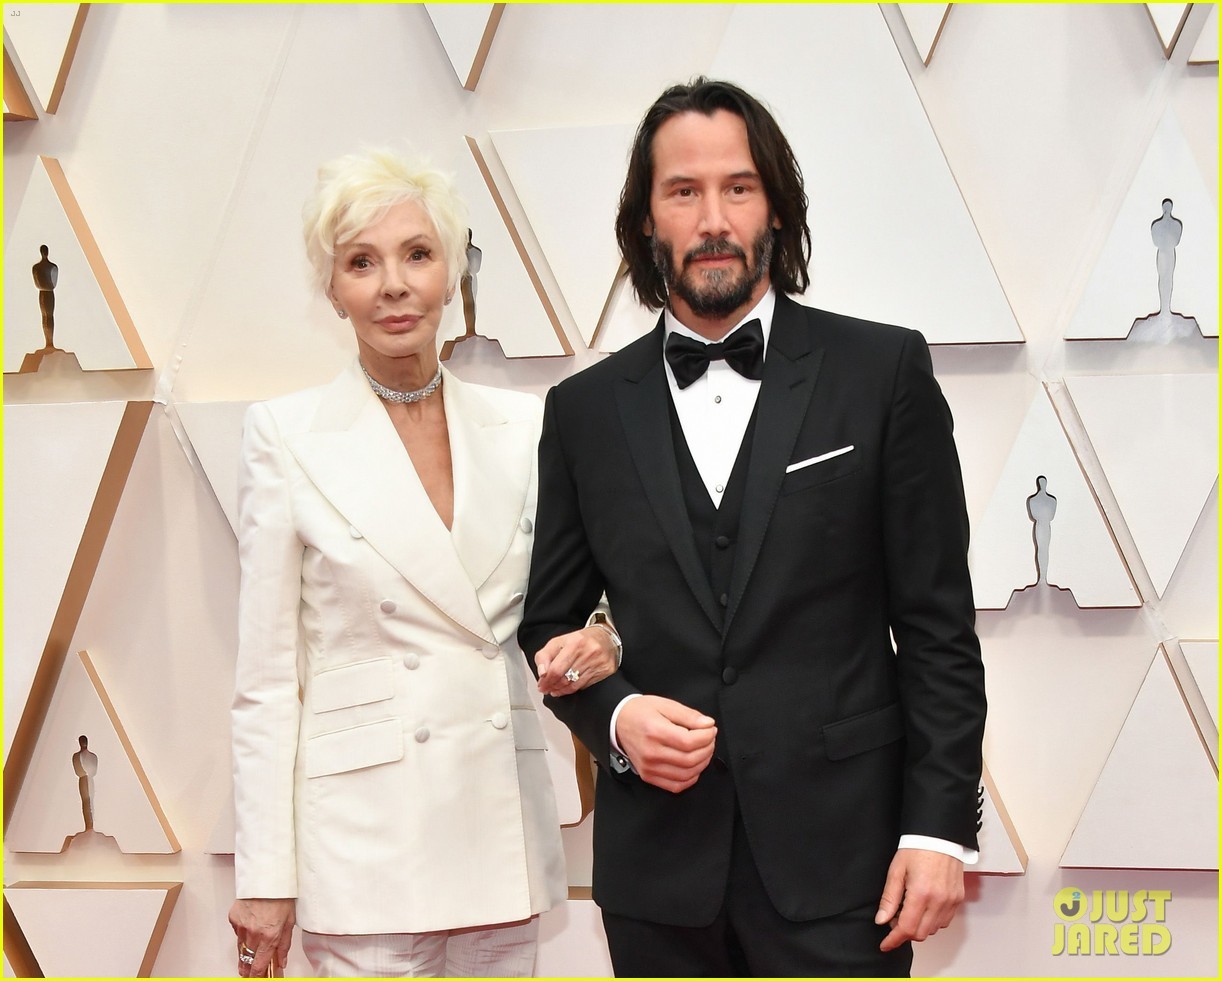 Keanu Reeves with his lover and mother. Comparison - Keanu Reeves, Matrix, John Wick, Comparison, Celebrities, Mum, Darling, Actors and actresses, Favorite